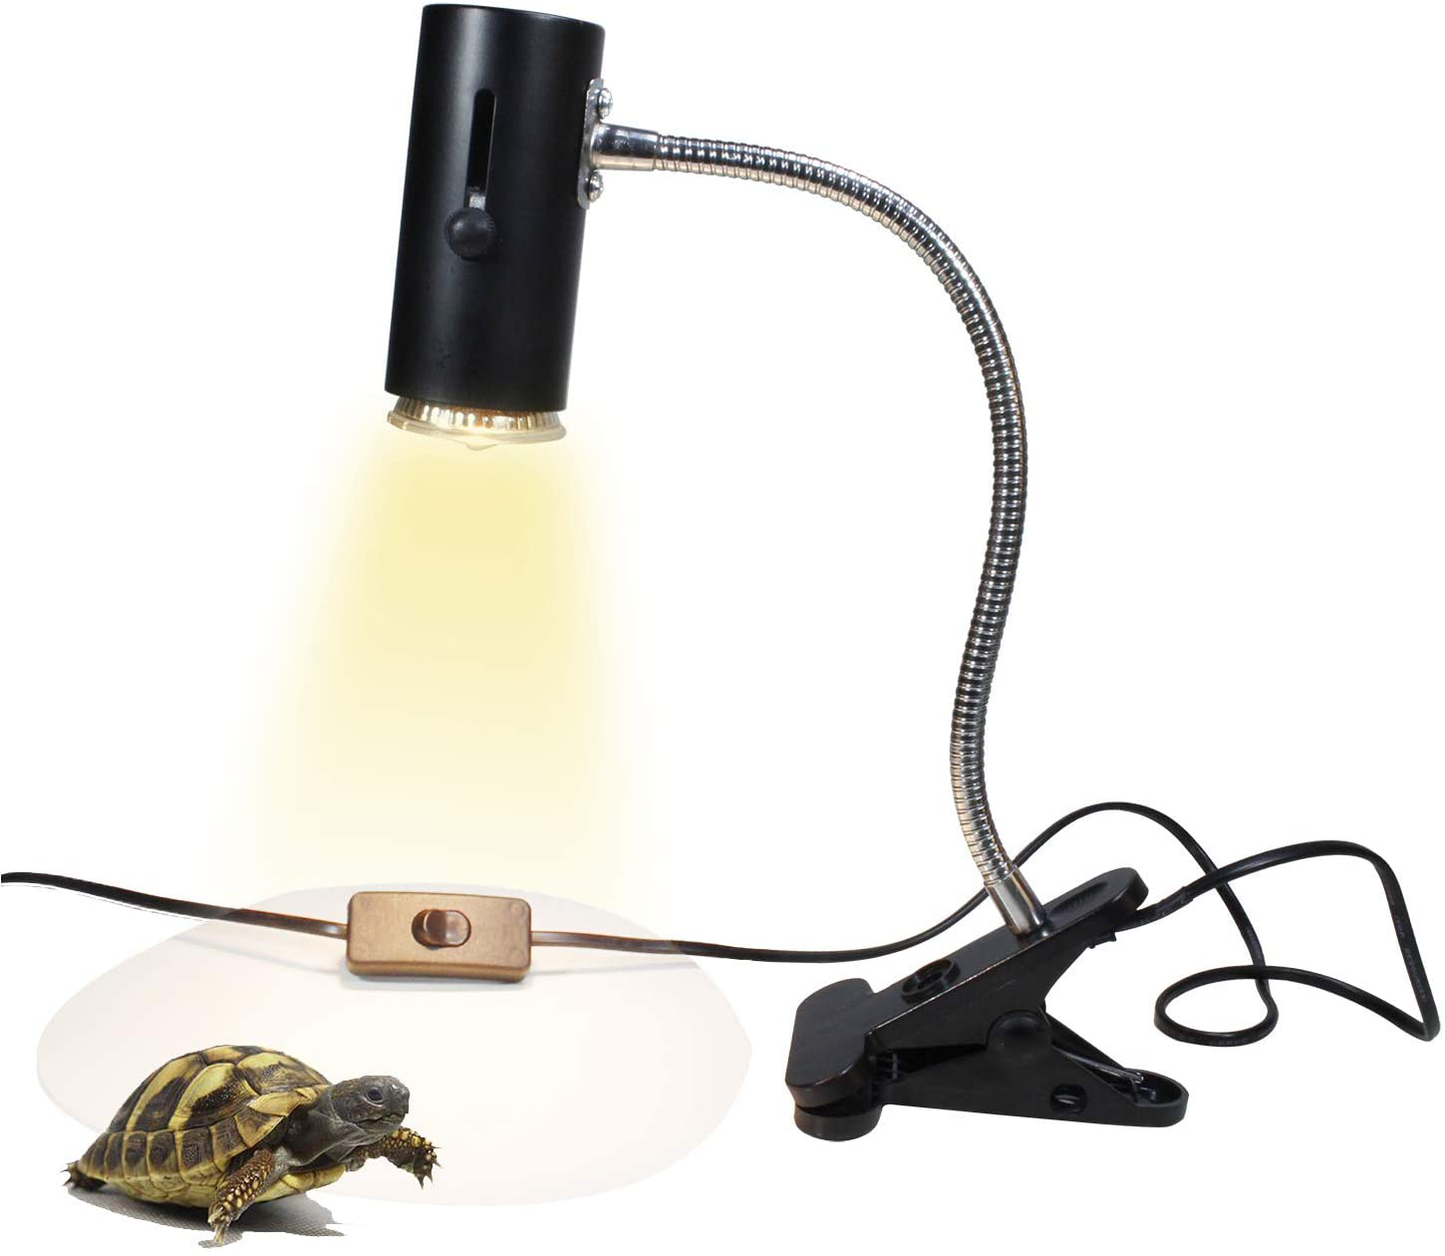 STBTECH Heat Lamp for Reptiles Turtle,Clamp Lamp Holder with 50W Halogen Bulb,Heating Lamp for Reptile and Amphibian Habitat Basking Animals & Pet Supplies > Pet Supplies > Reptile & Amphibian Supplies > Reptile & Amphibian Habitats STBTECH Long neck  